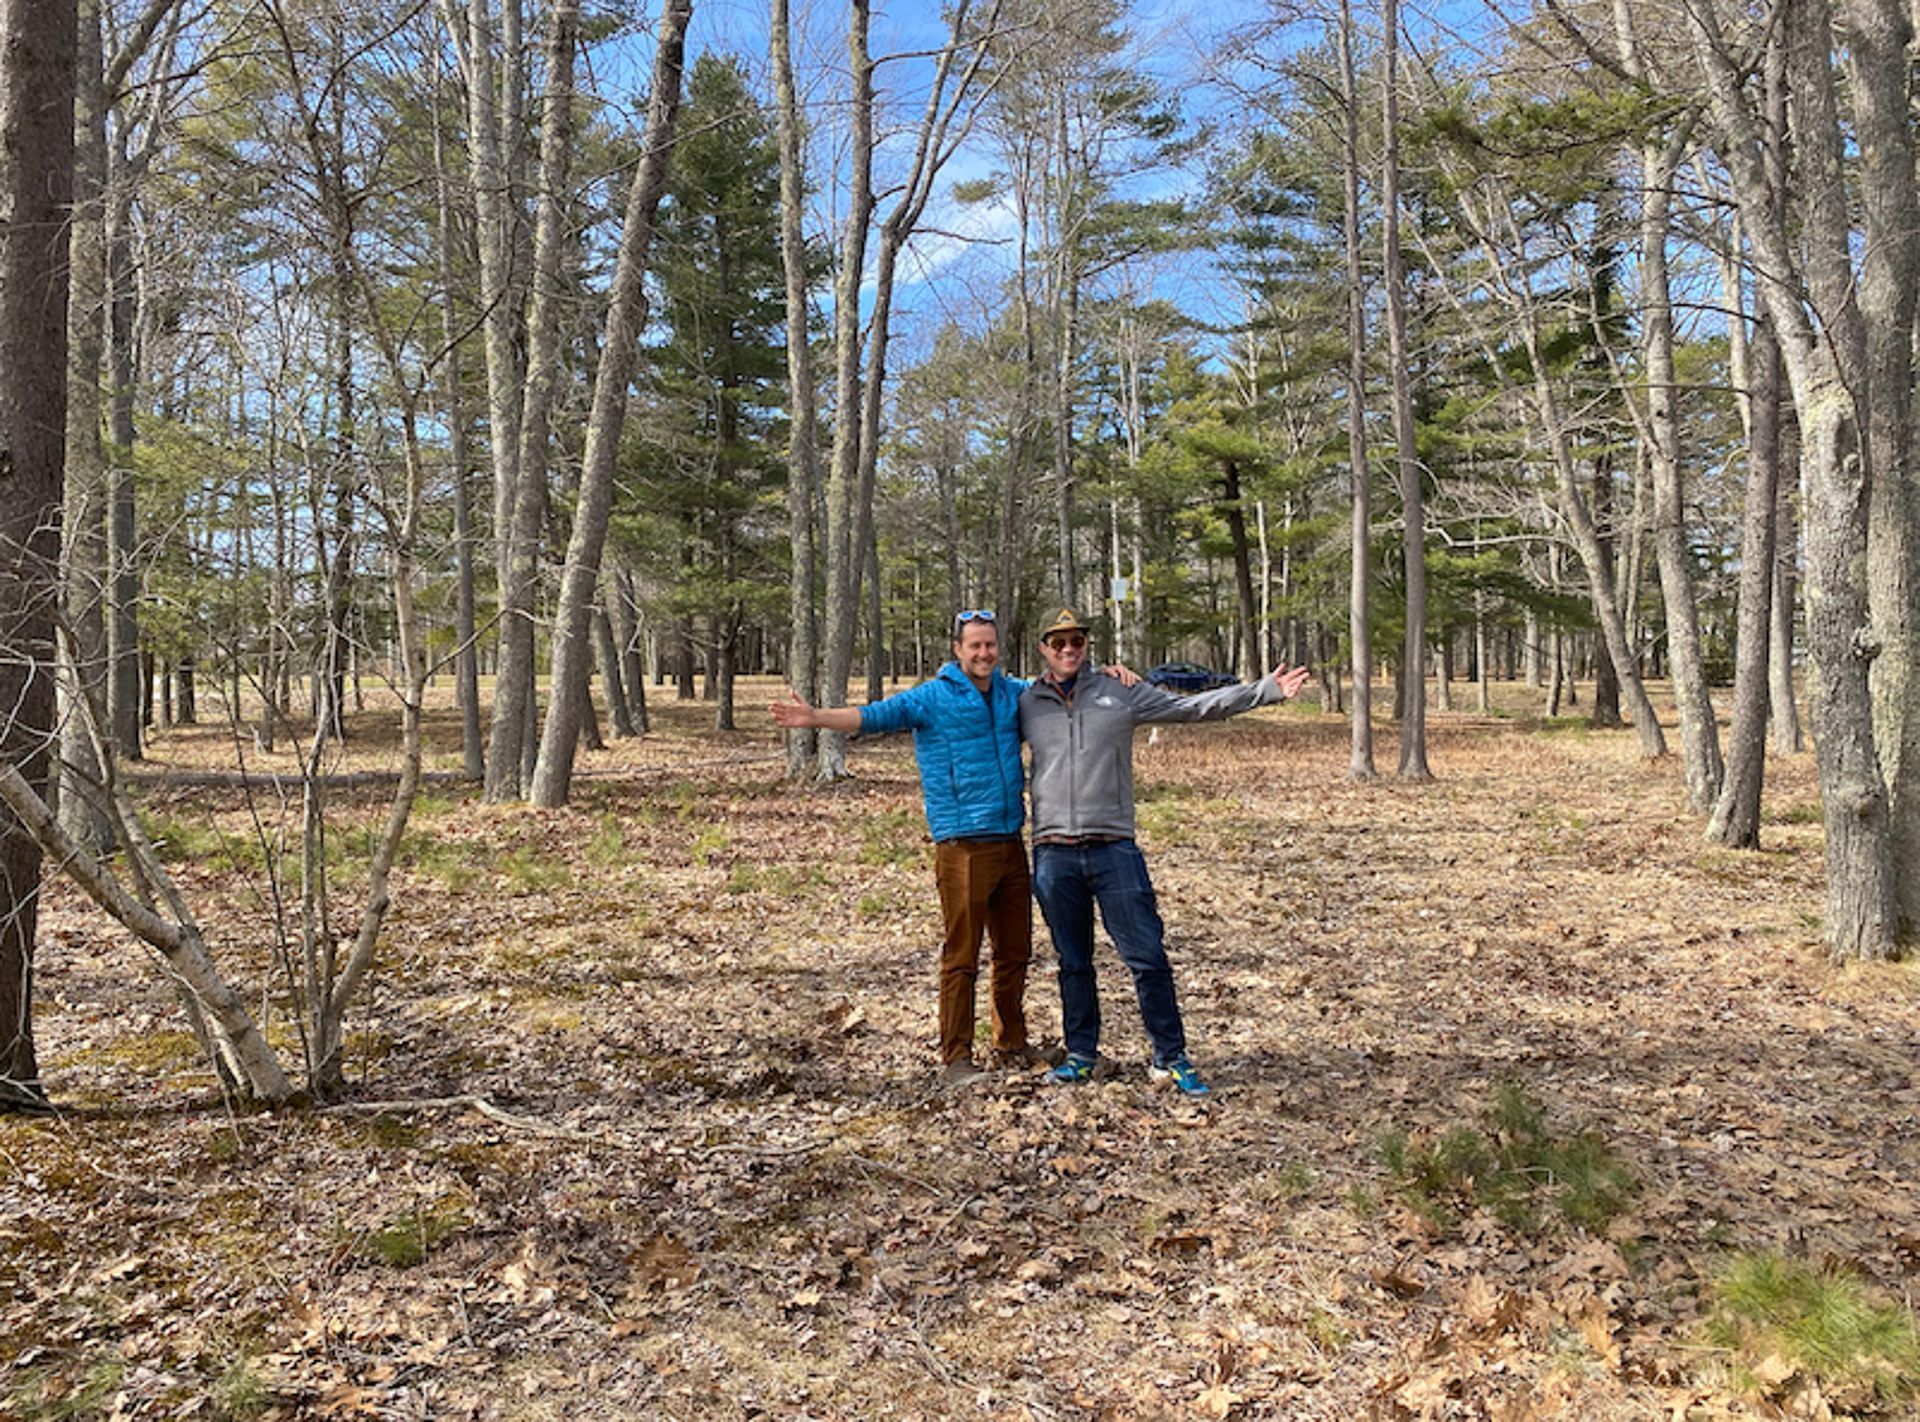 Dave and Jason on the grounds where the Sandpiper was built, before construction began